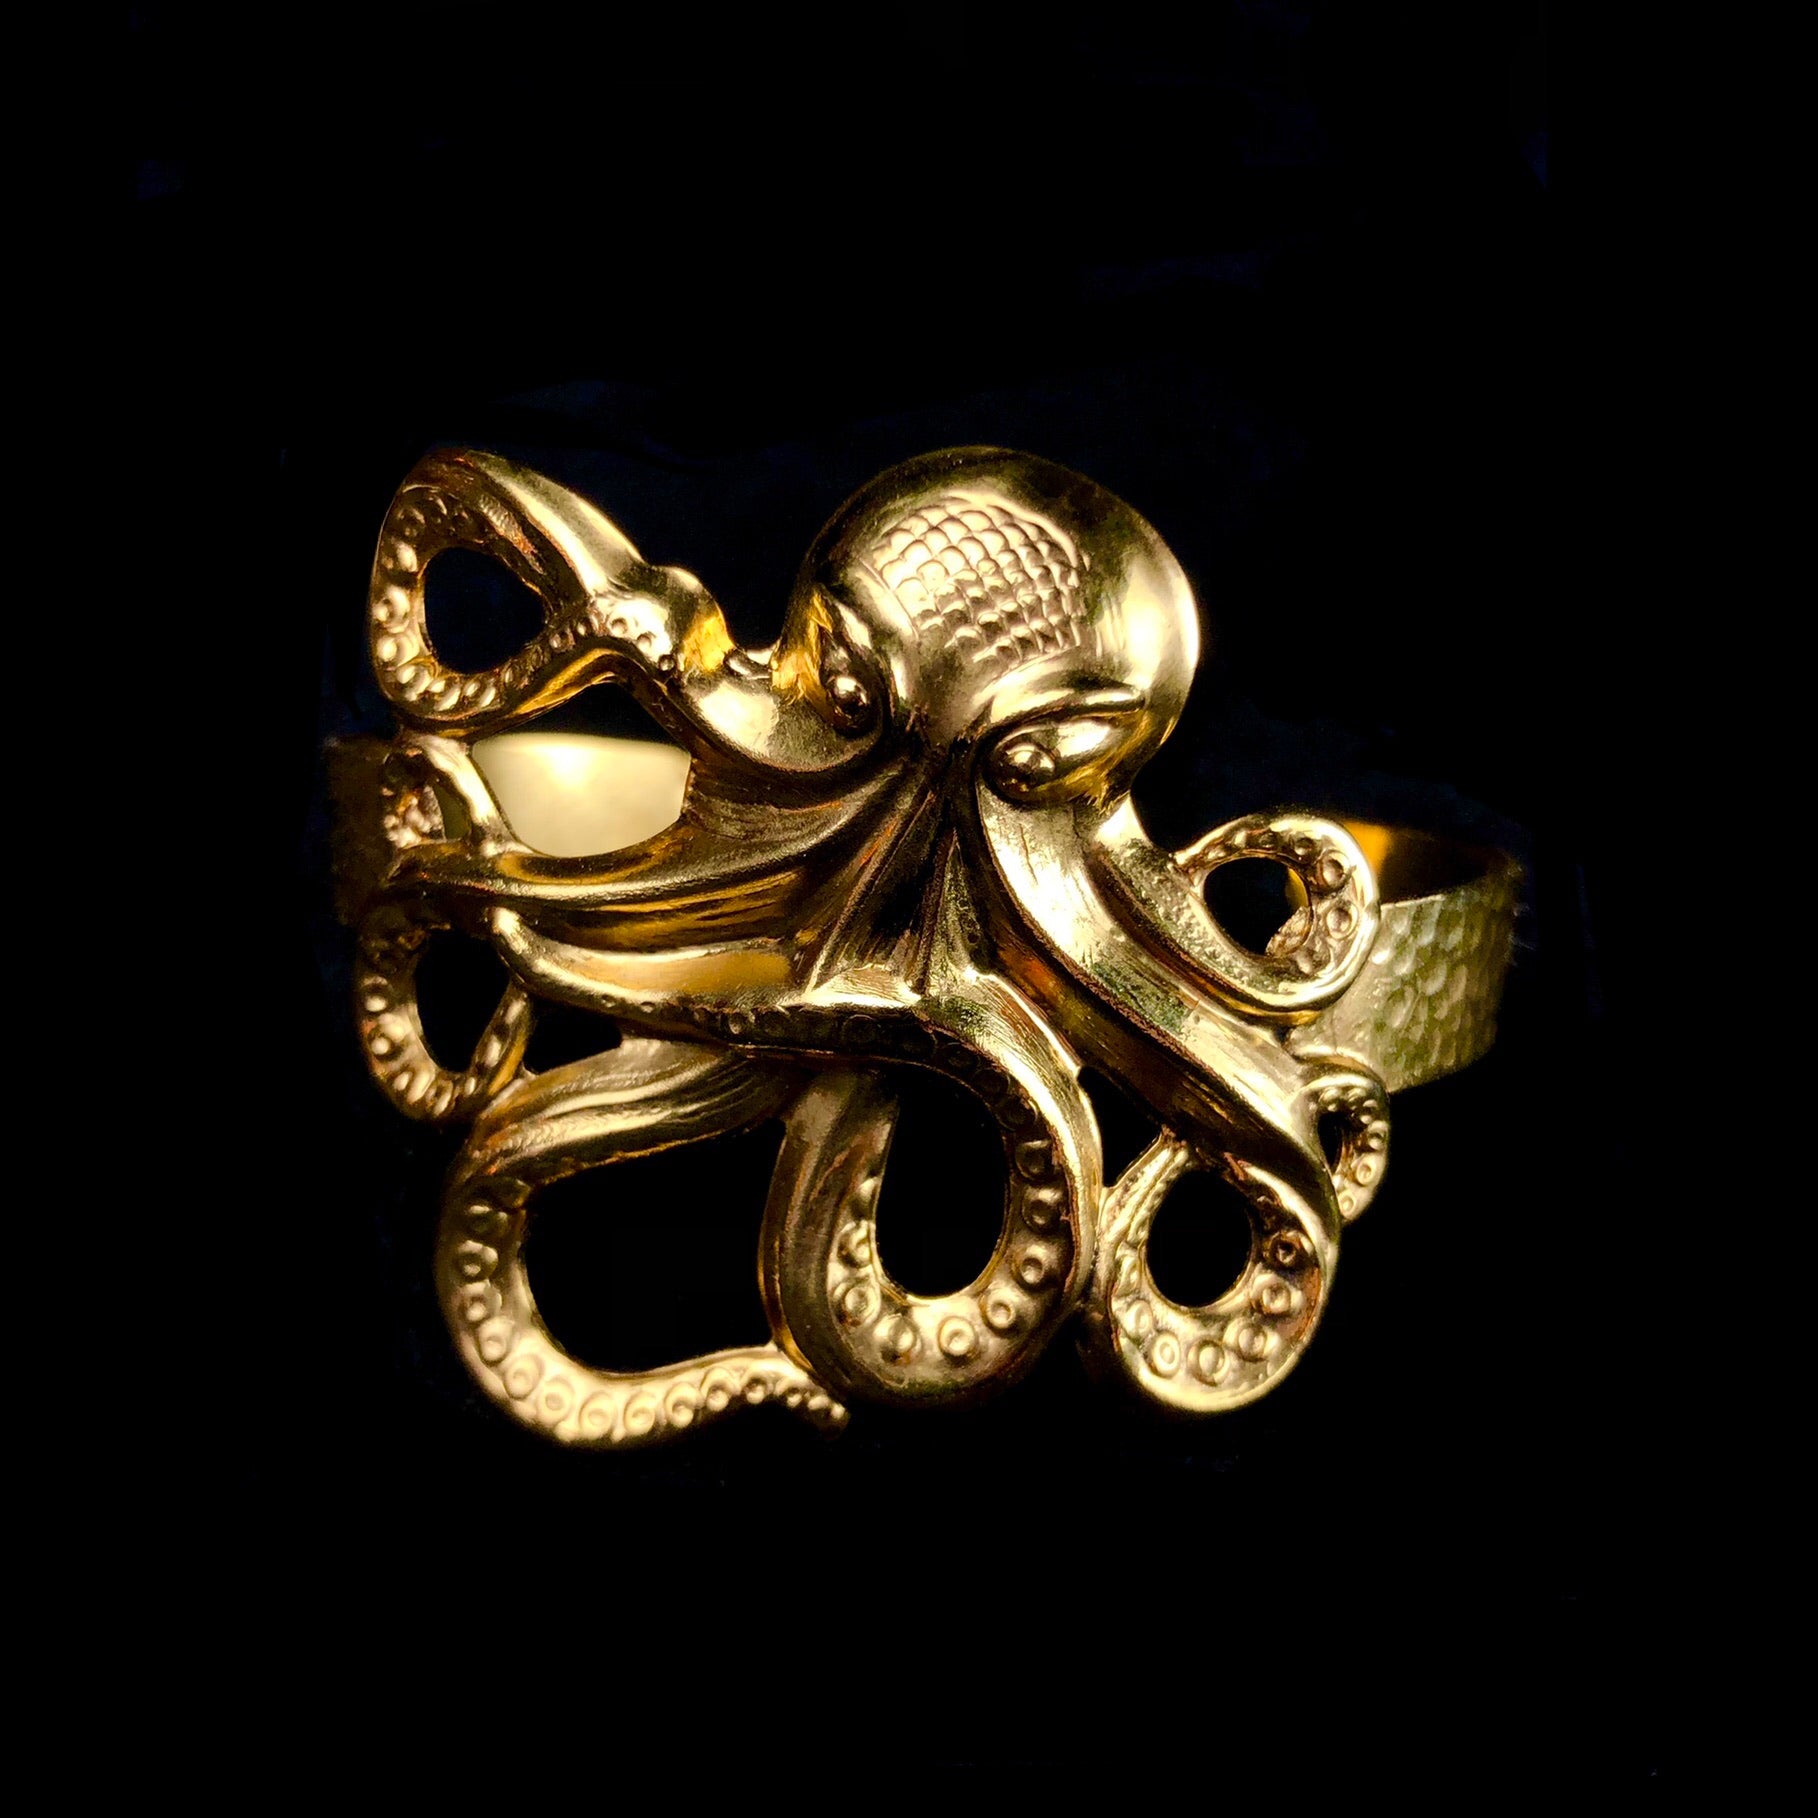 Stamped and cutout gold octopus with tentacles outstretched